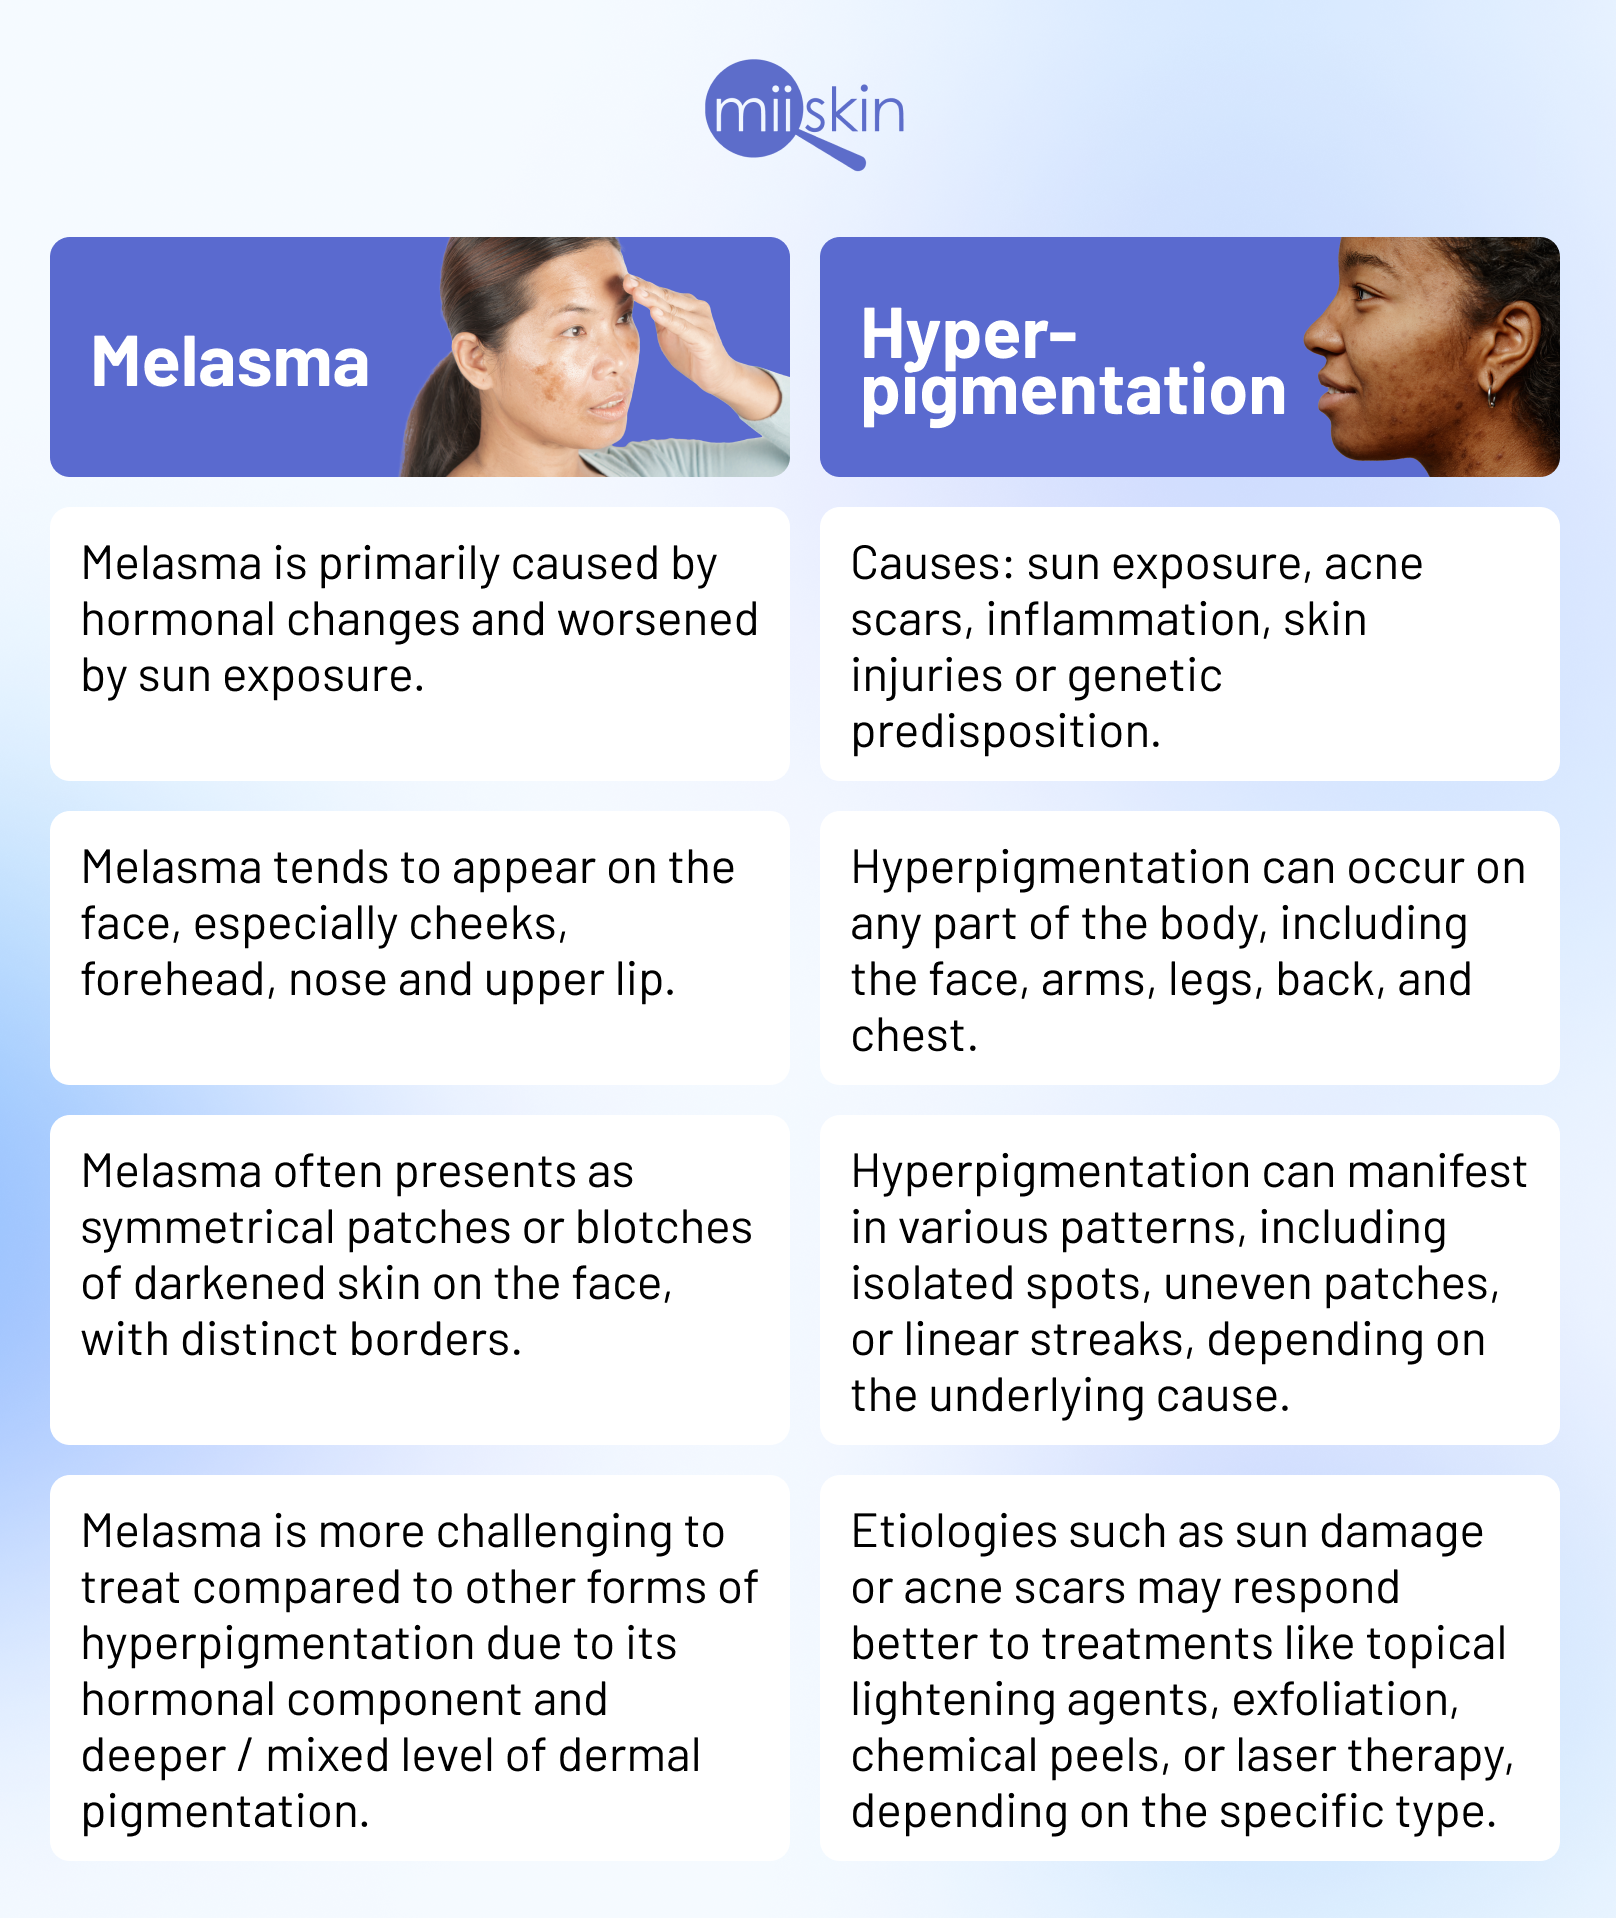 hyperpigmentation and melasma what is the difference